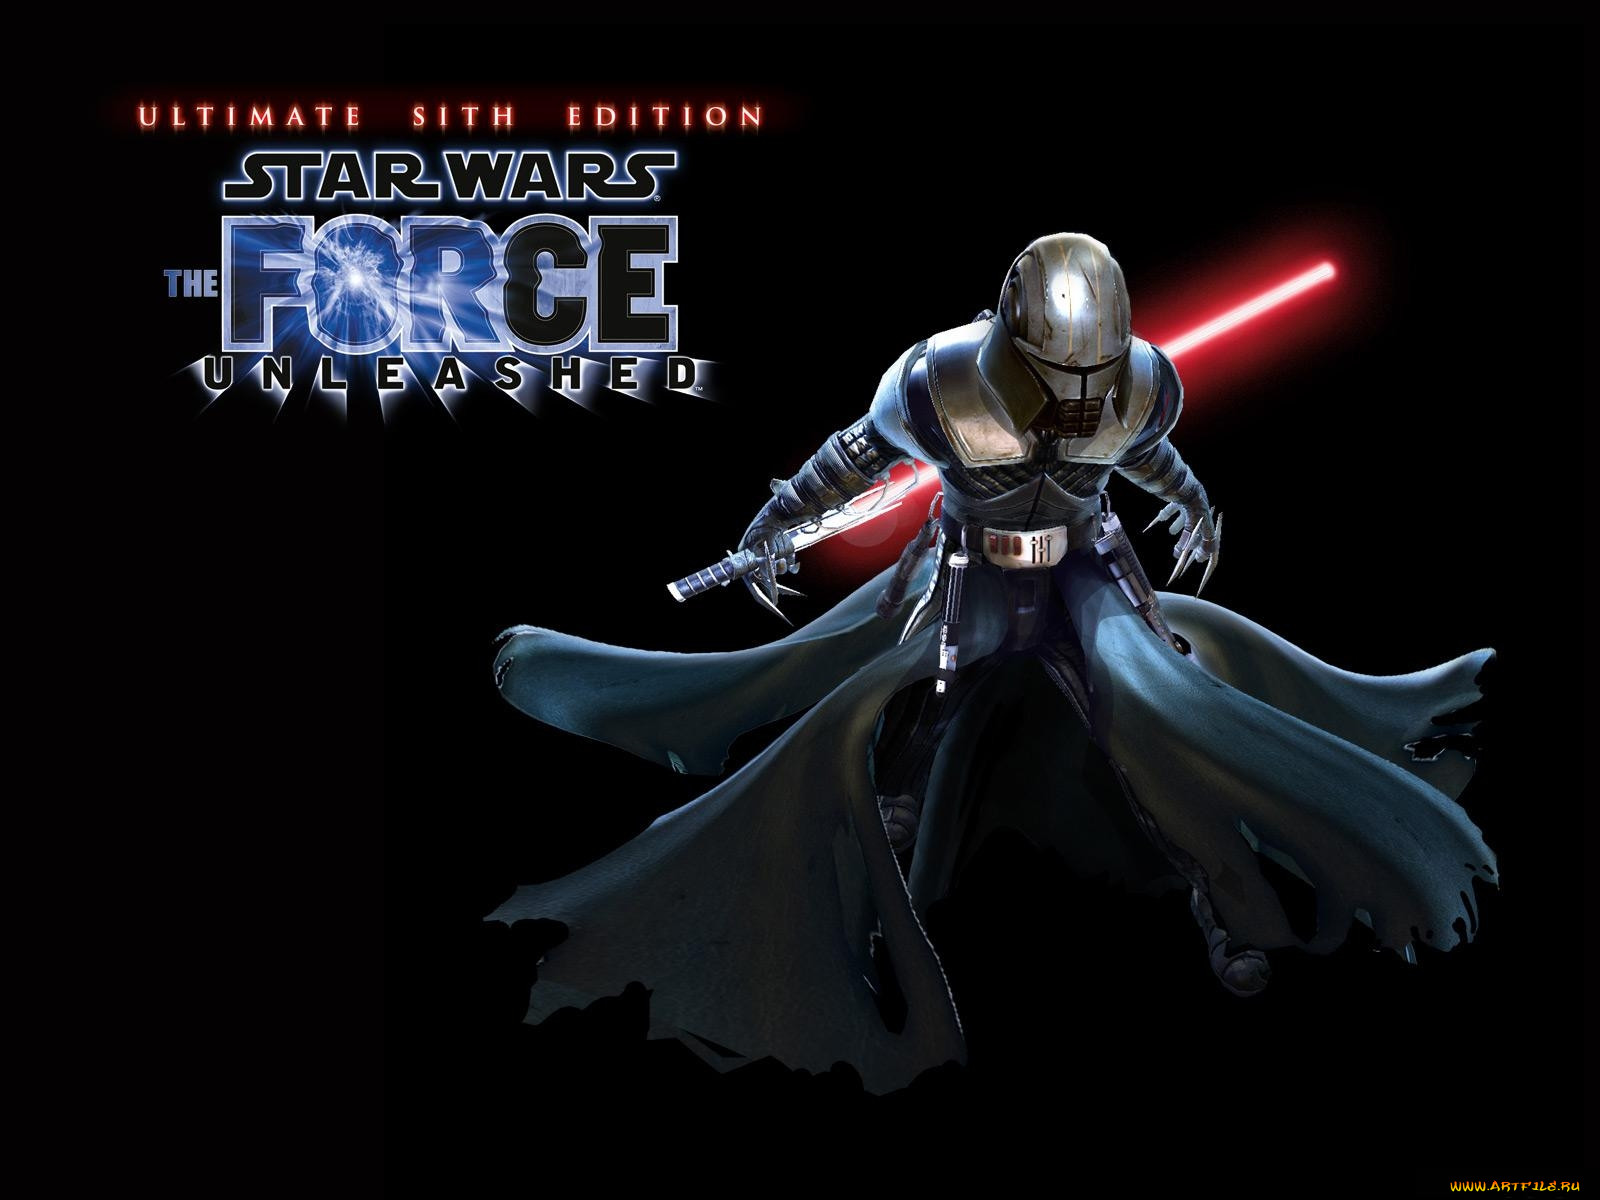 Игра star wars the force unleashed. Star Wars: the Force unleashed. Star Wars unleashed 2 Старкиллер. Стар ВАРС Форс Анлишед 1. Star Wars: the Force unleashed - Ultimate Sith Edition.